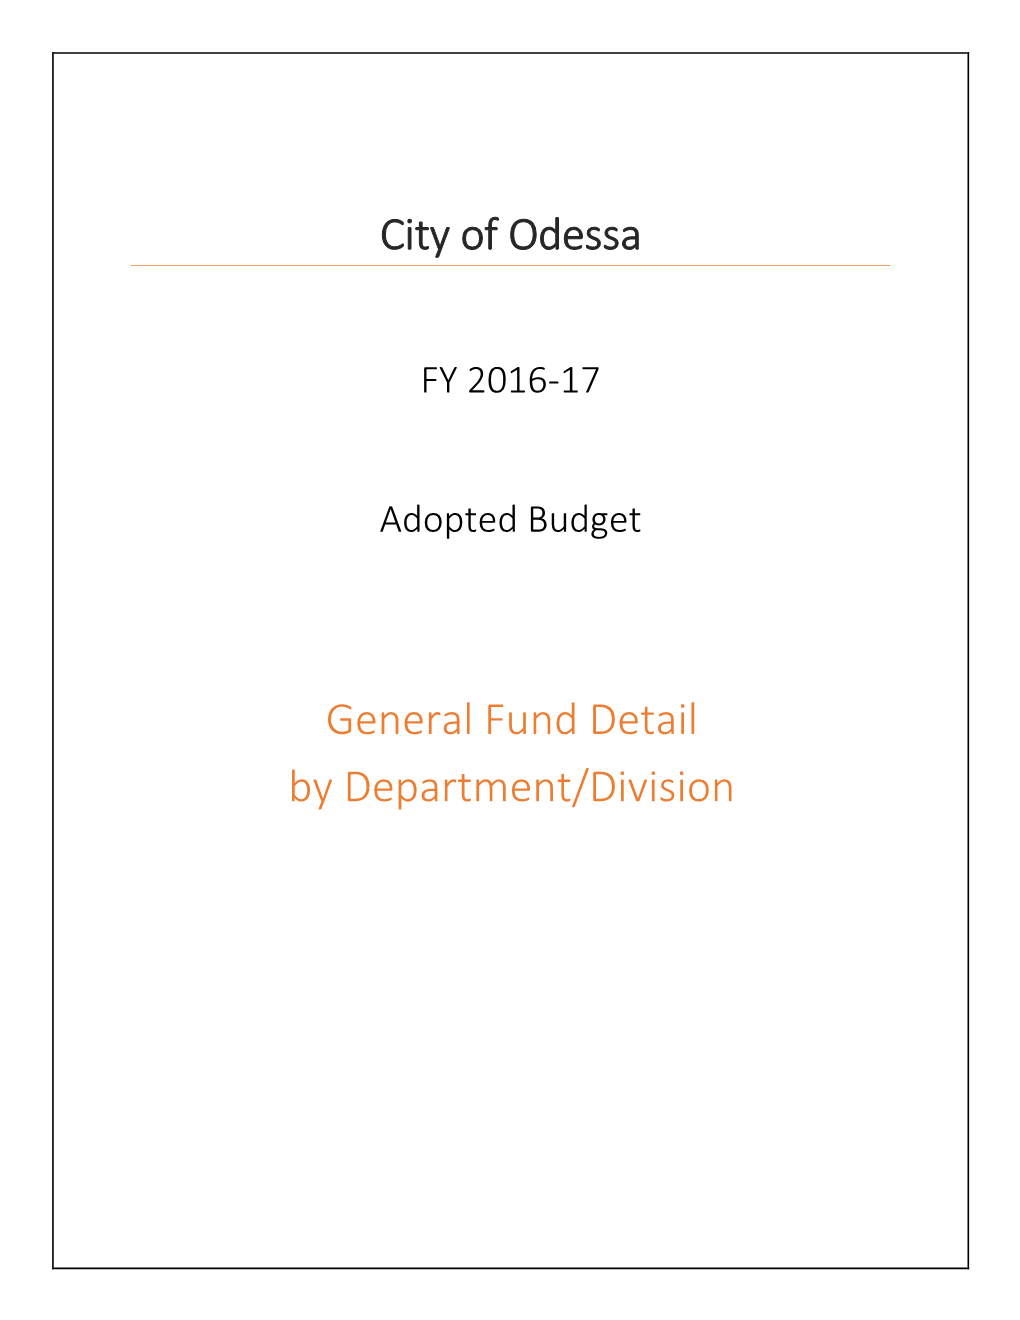 City of Odessa General Fund Detail by Department/Division